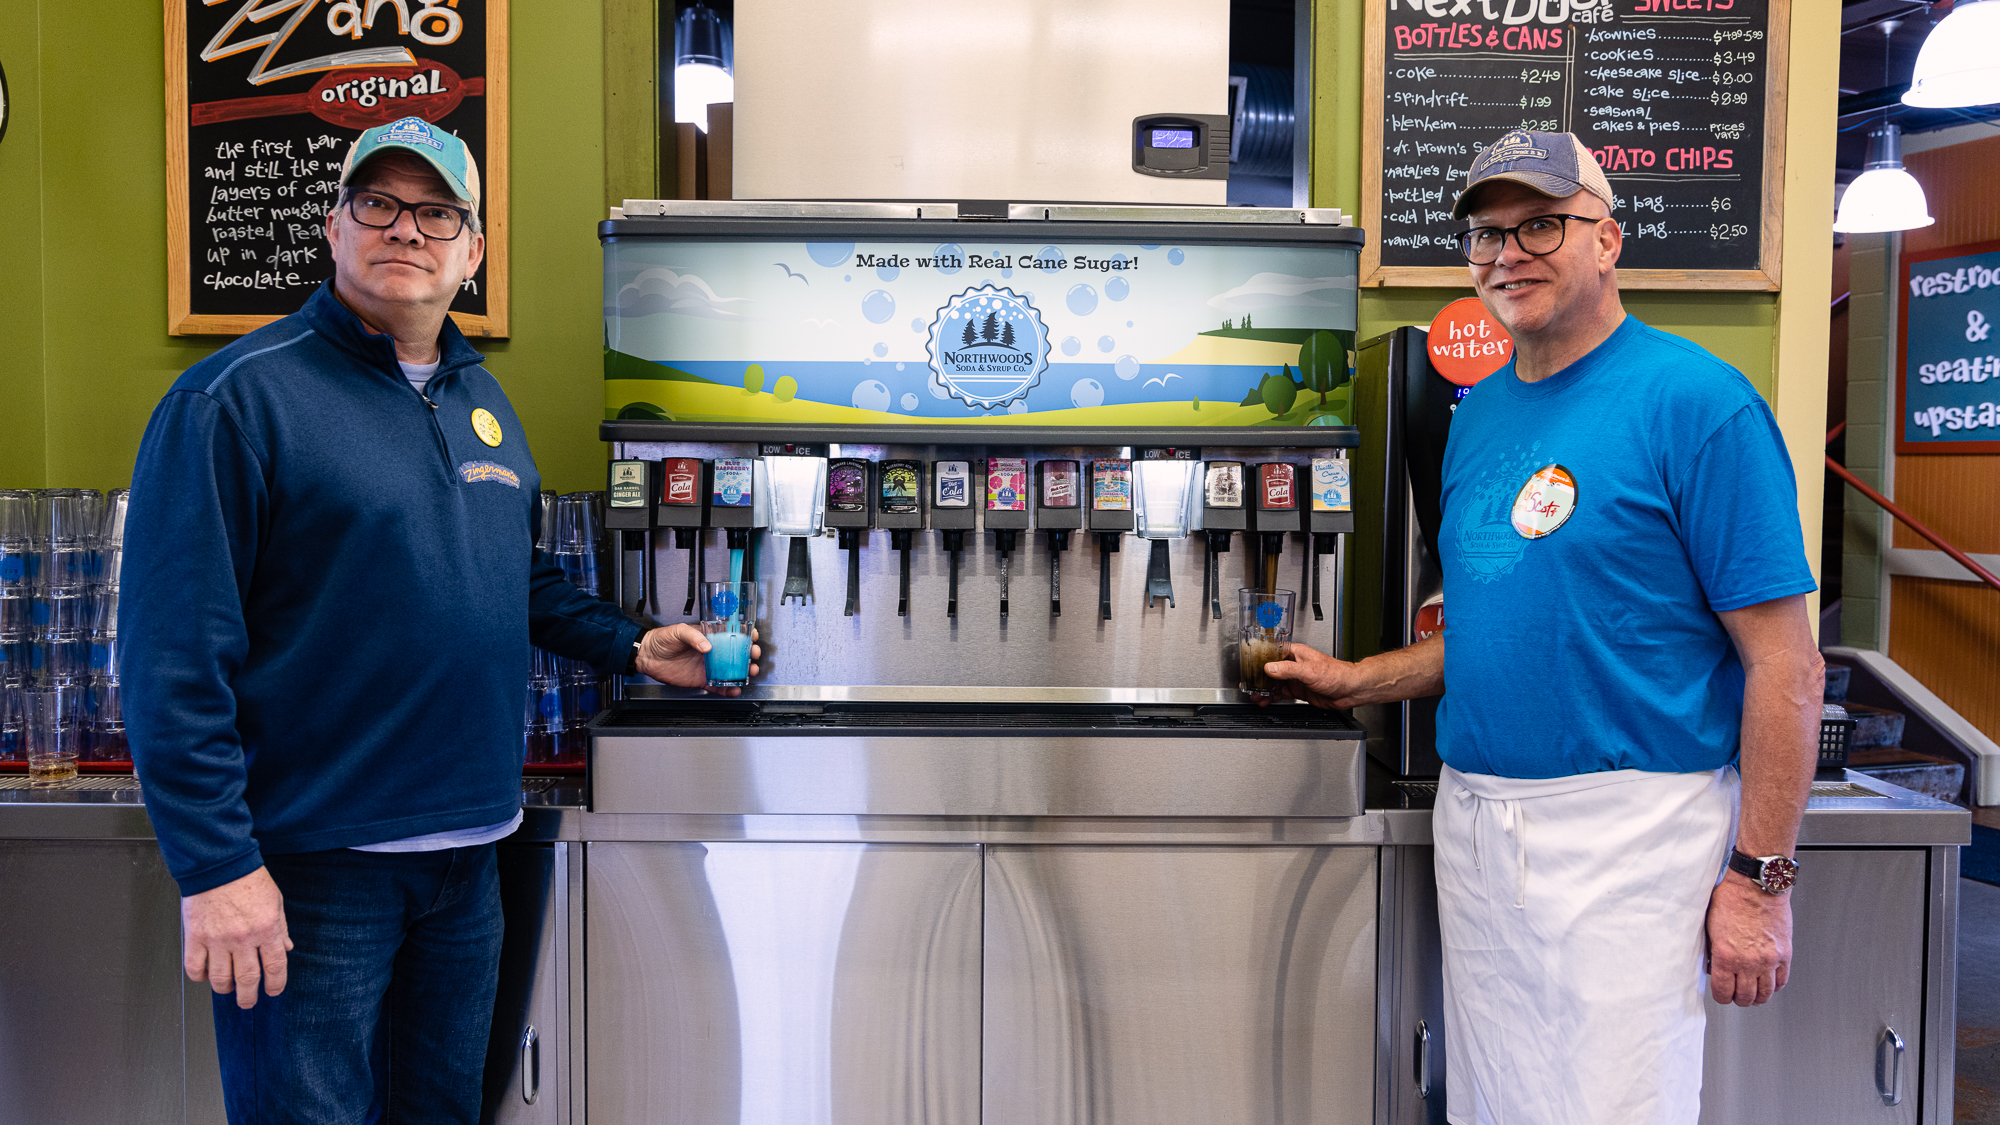 a photo of Deli managing partner Rick Strutz and Deli staffer Scott Geisler standing on either side of the soda fountain with the Northwoods logo and tap stickers